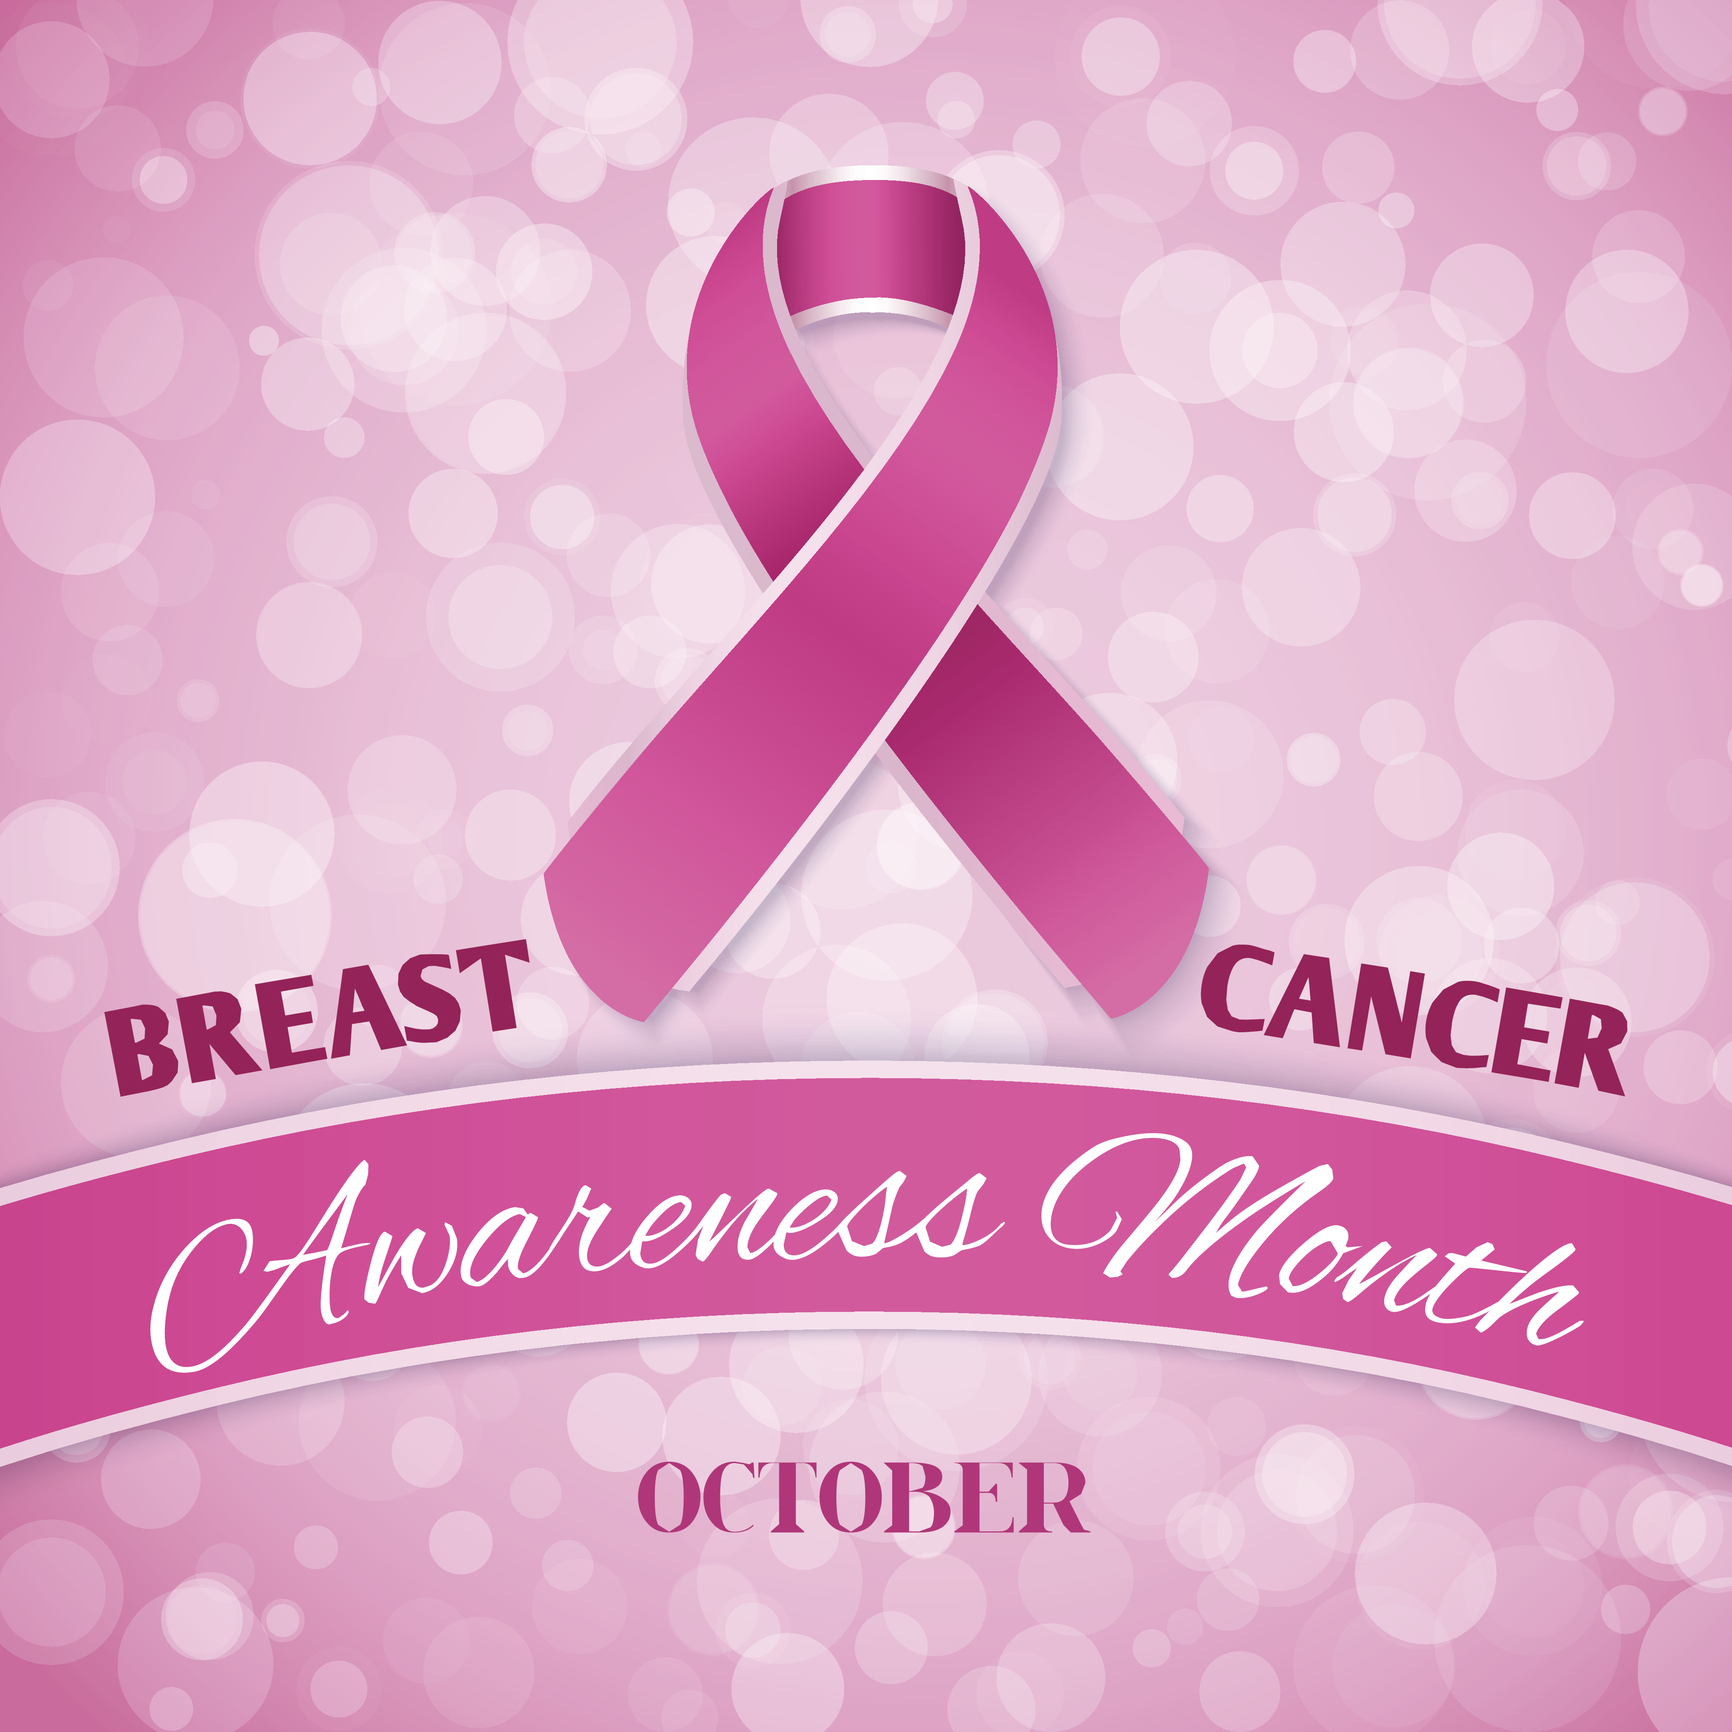 Awareness month cancer breast October Is